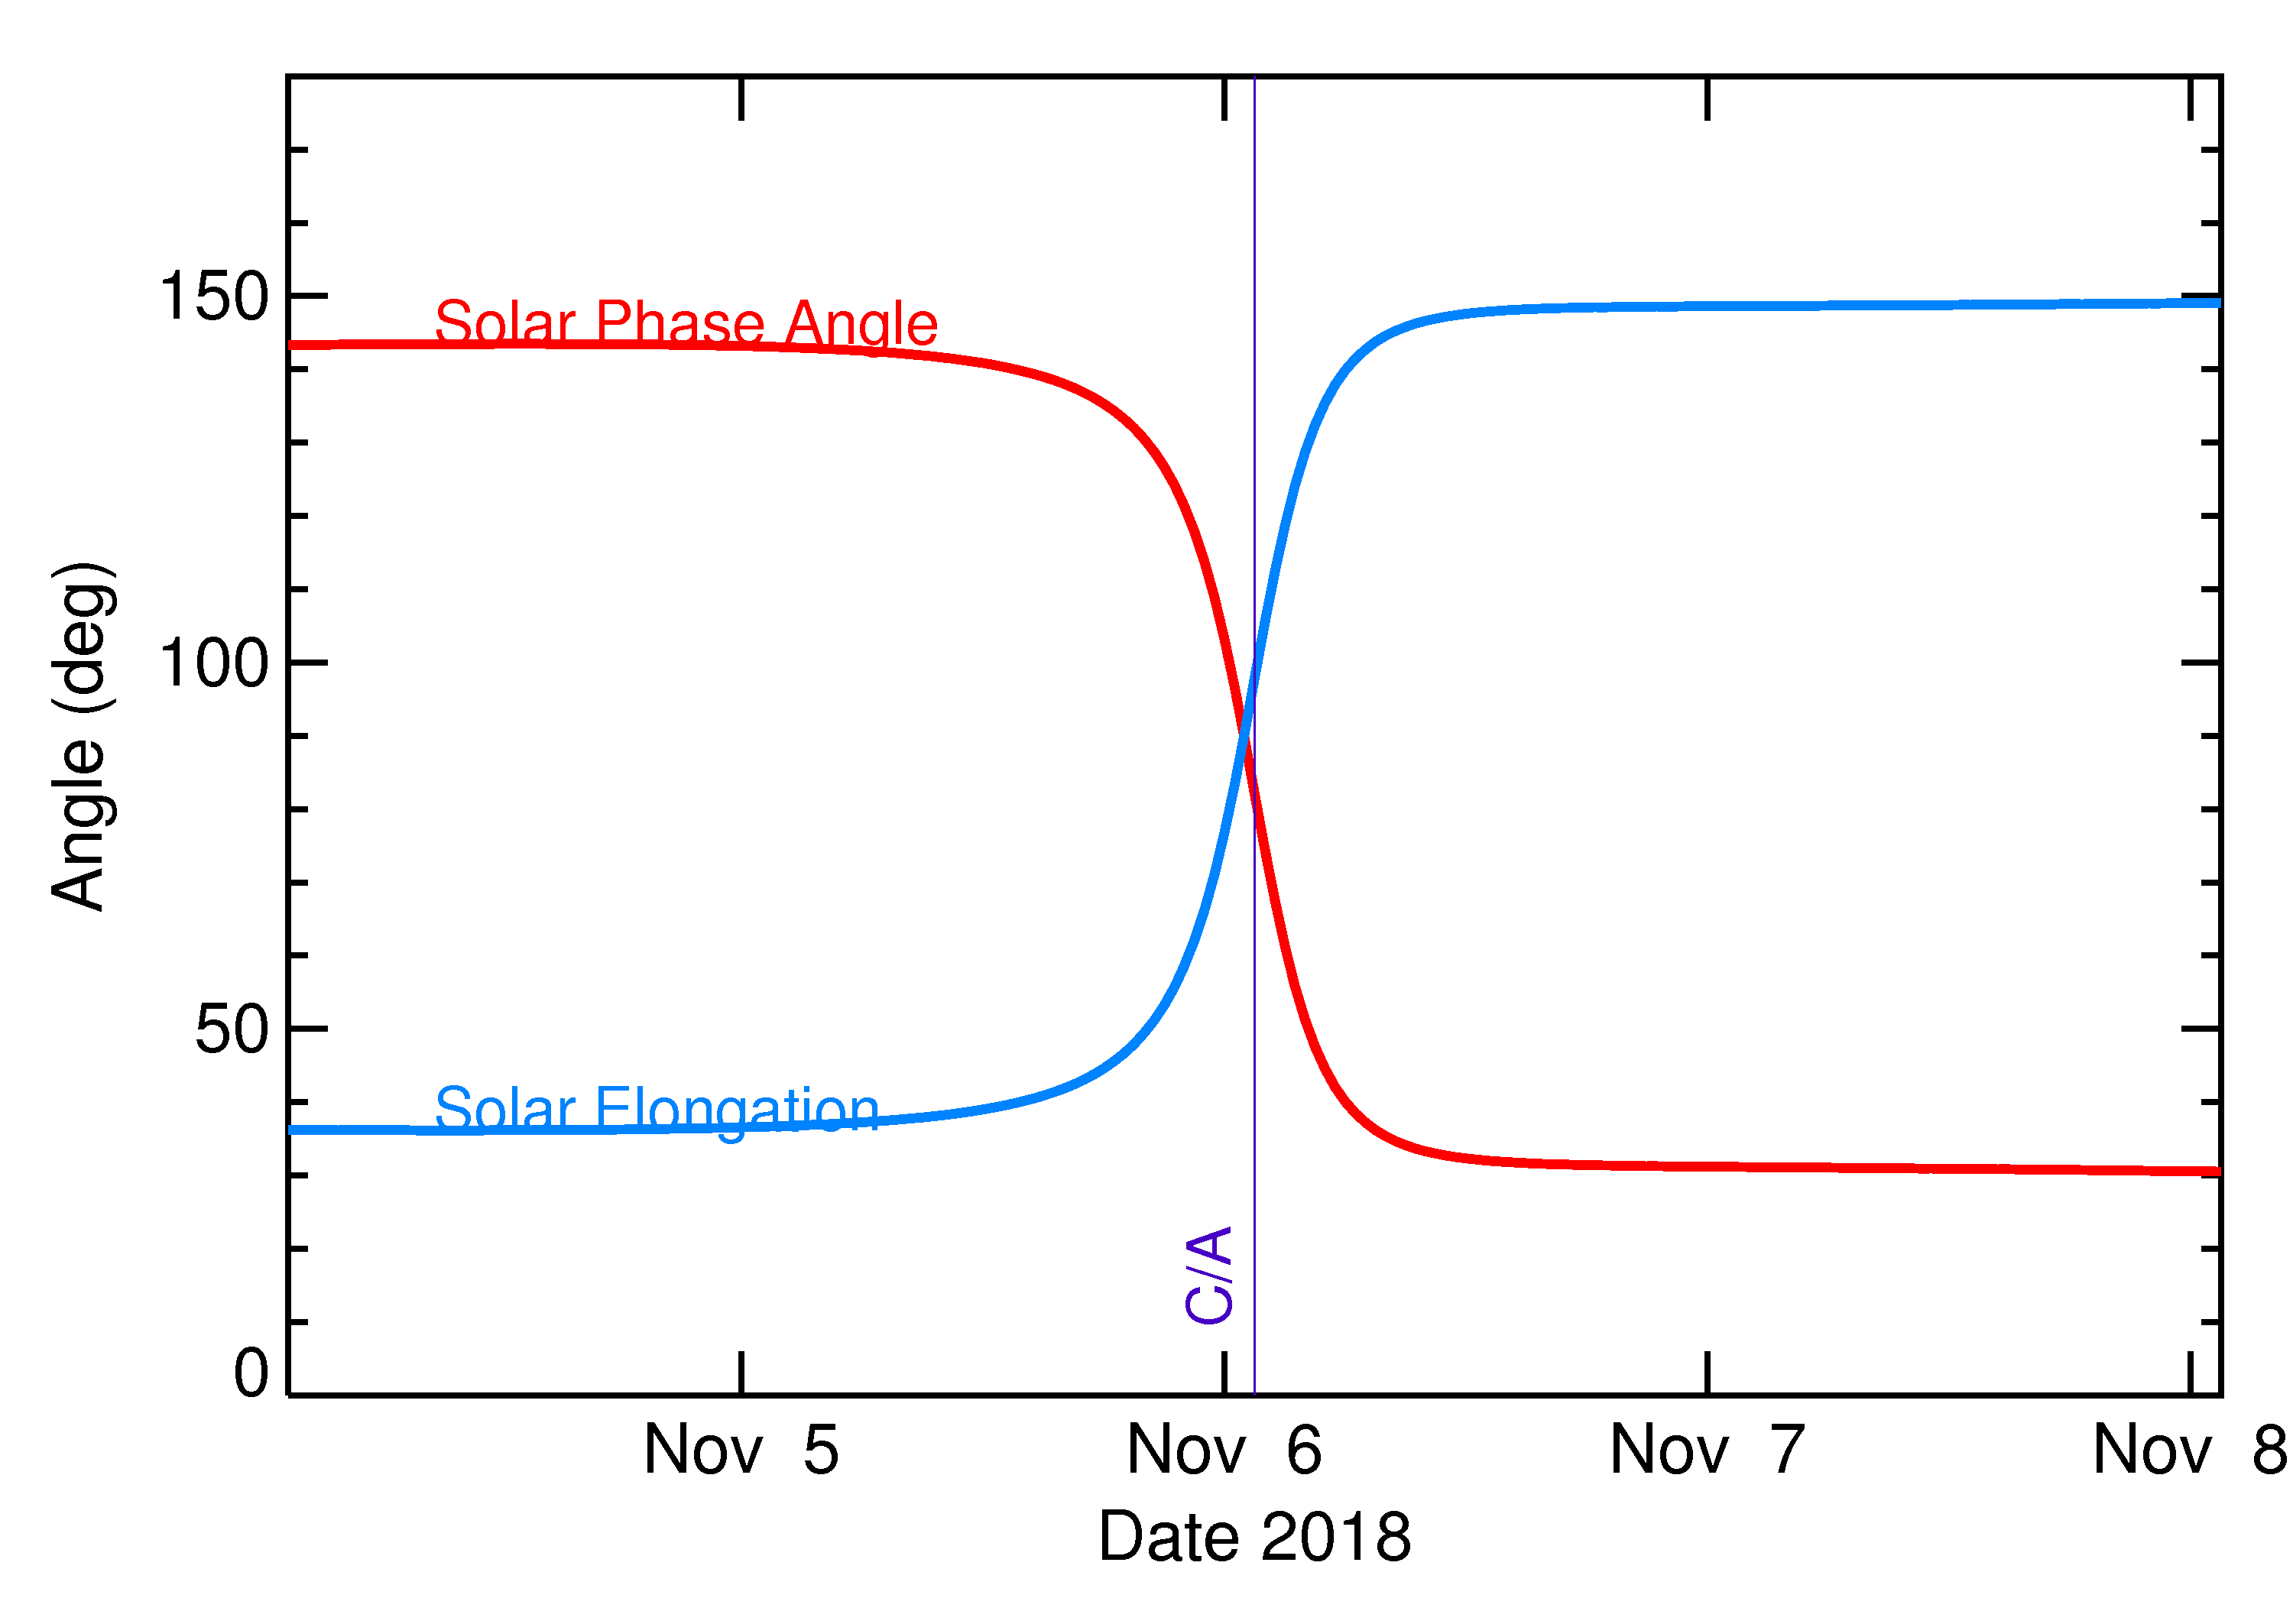 Solar Elongation and Solar Phase Angle of 2018 VO5 in the days around closest approach